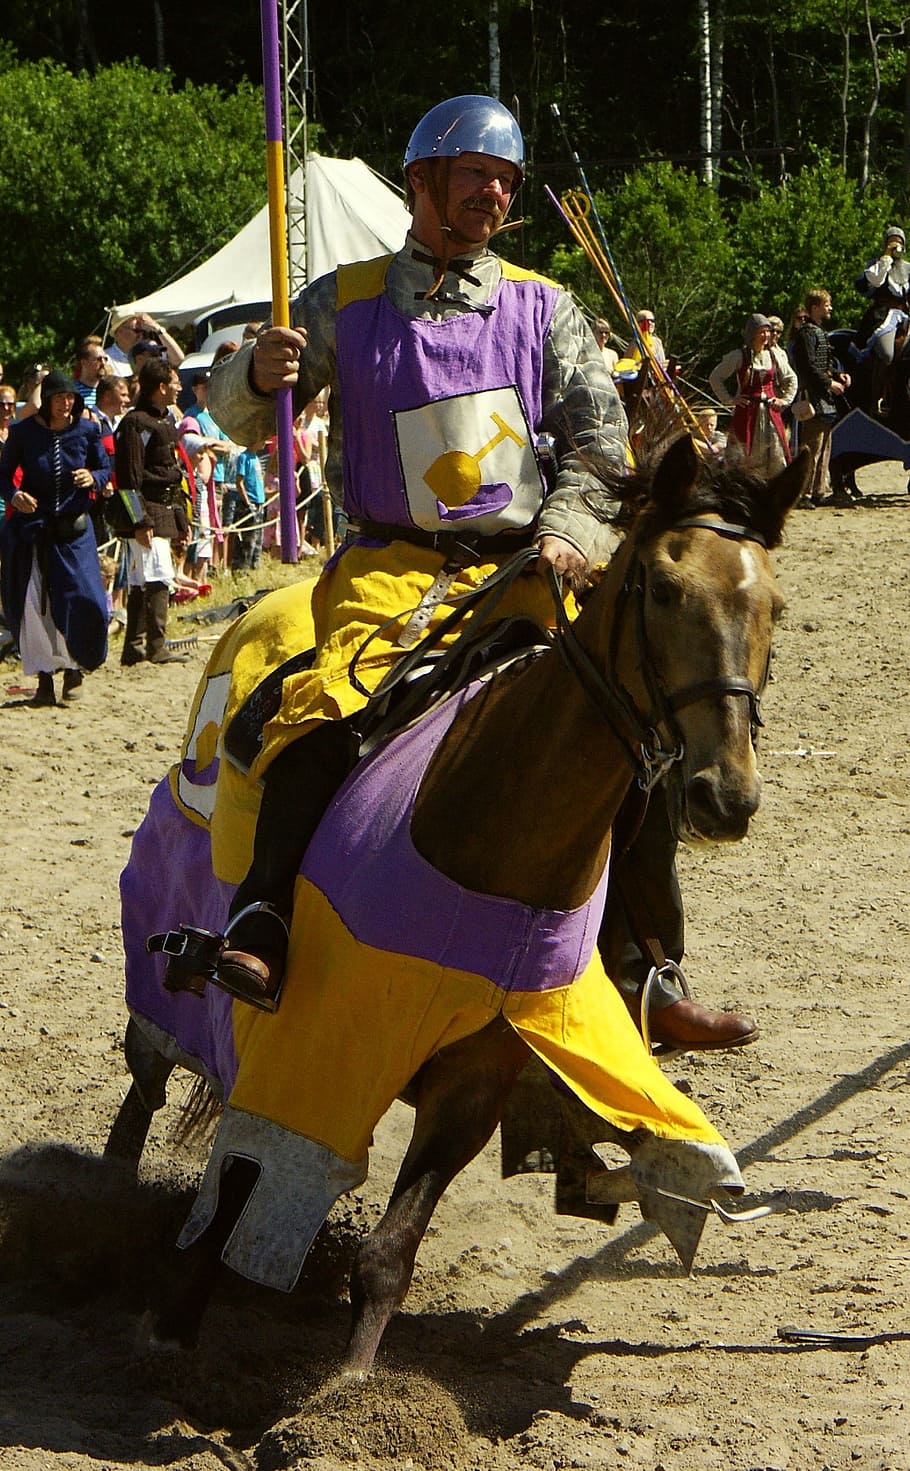 Knights, Man, Horse, Jousting, cultures, music, only men, performance, full length, adults only